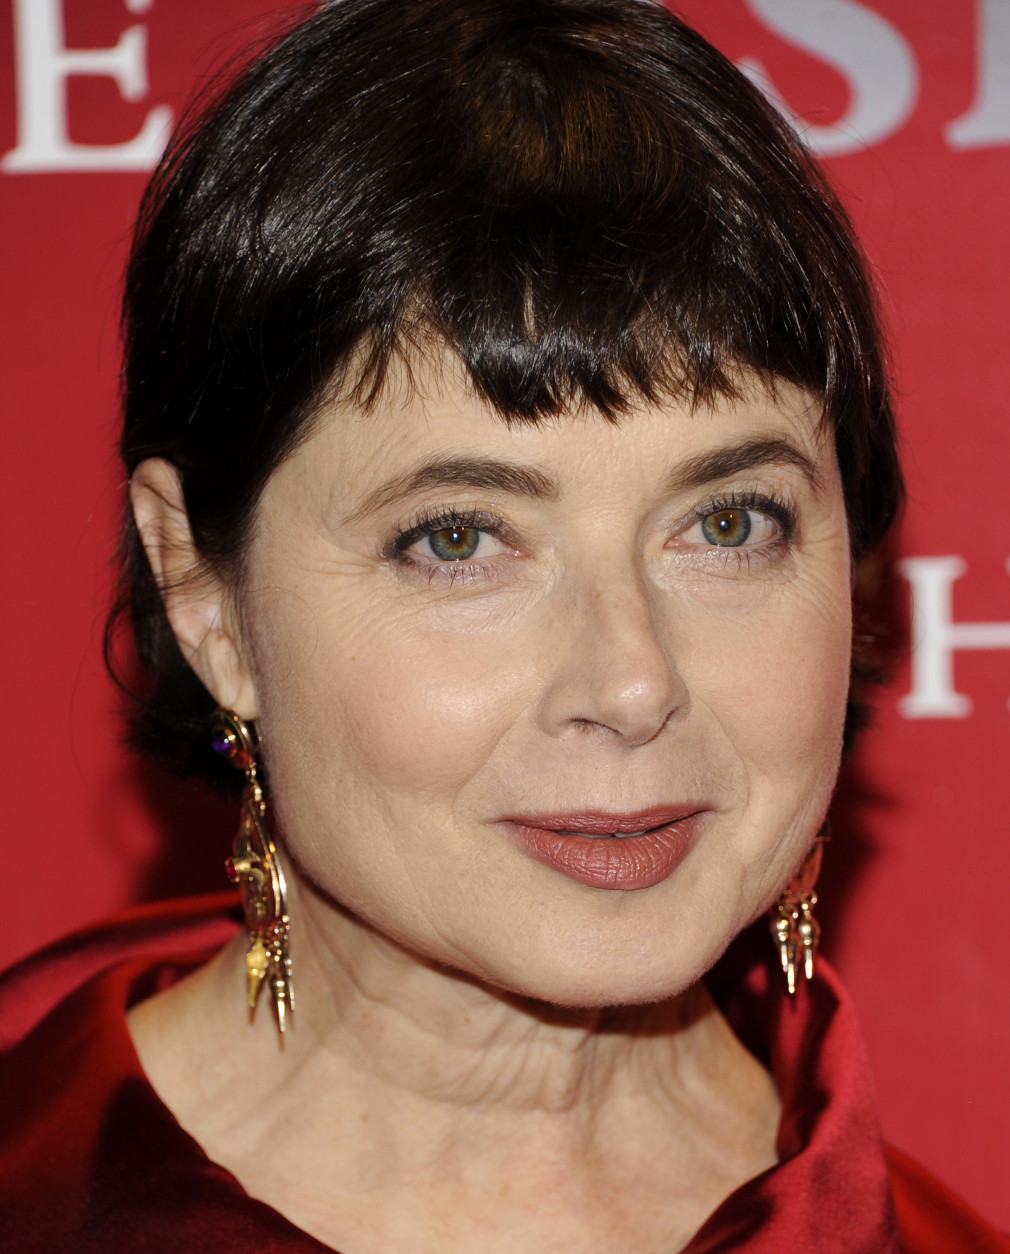 Actress Isabella Rossellini attends the Fashion Group International's 28th Annual Night of Stars "The Luminaries" at Cipriani Wall Street on Thursday, Oct. 27, 2011 in New York. (AP Photo/Evan Agostini)